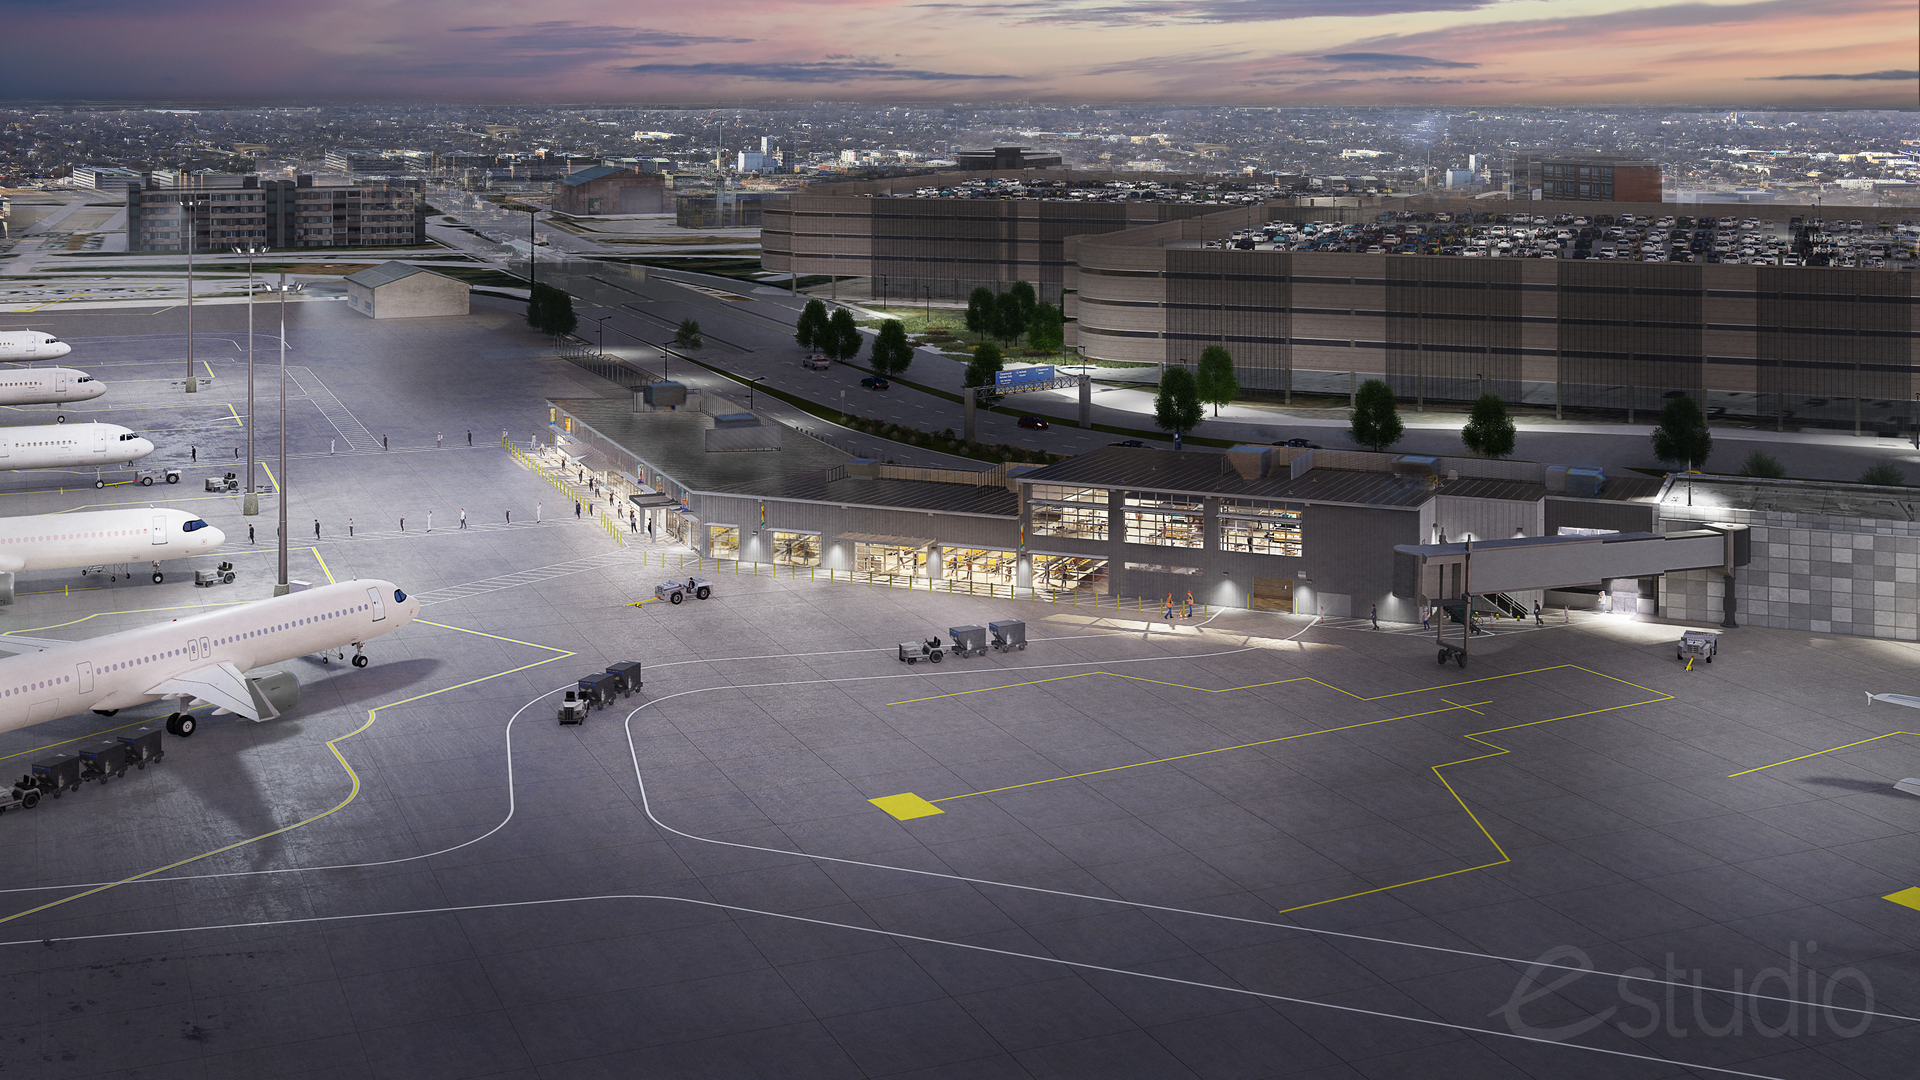 A rendering of a ground load facility at an airport.